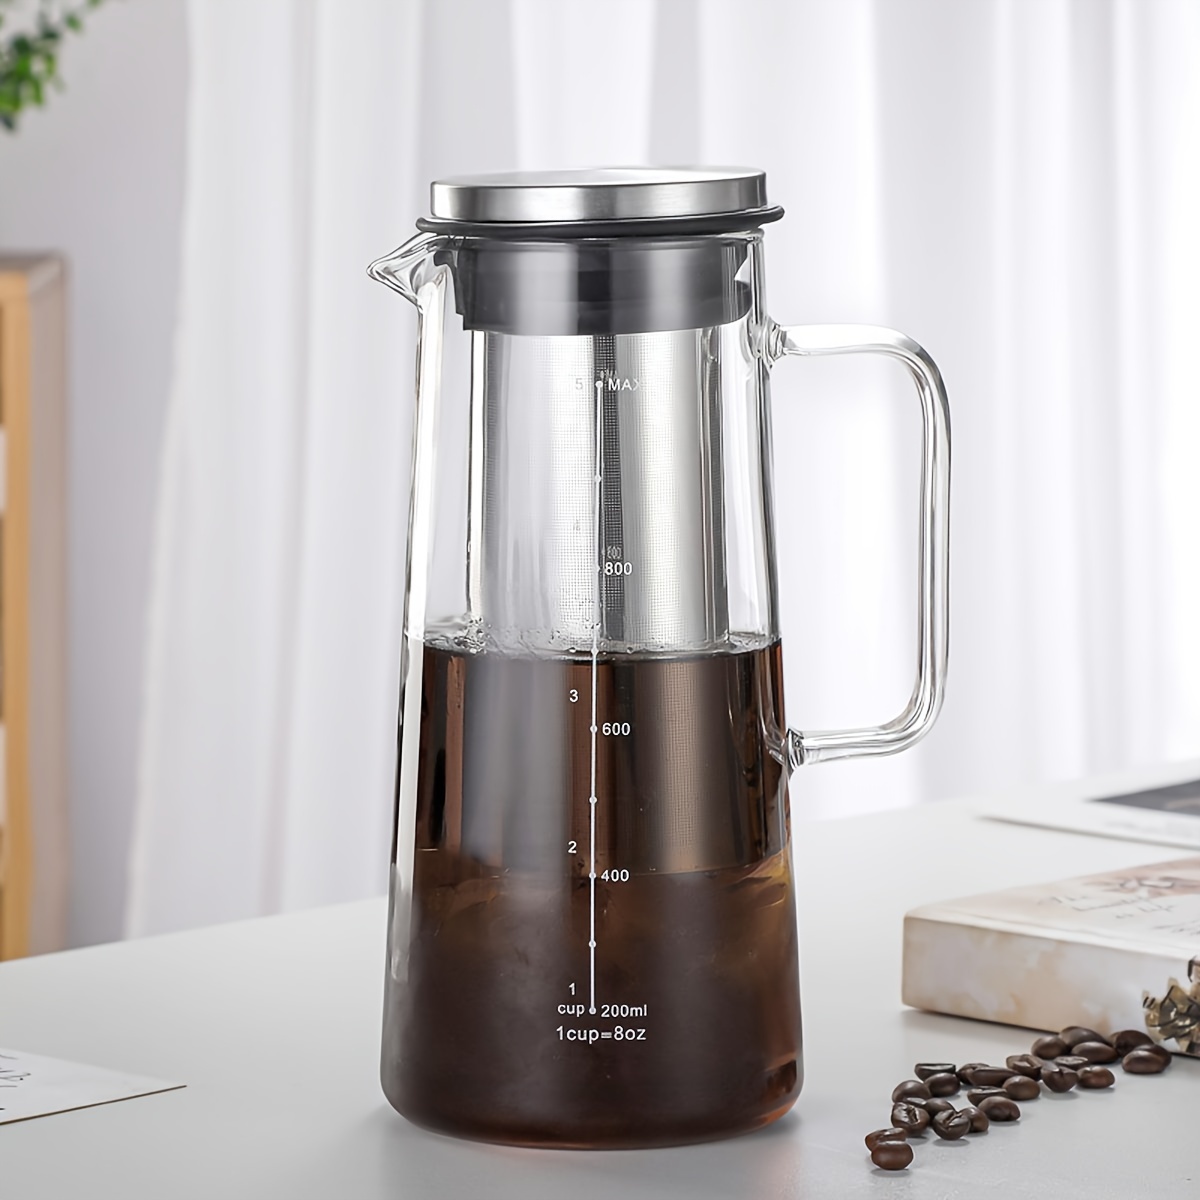 Home Pour Over Coffee Brewer -hand-drip Coffee Maker Pot With Heavy-duty  Glass Carafe And Lid, Paperless Stainless Steel Reusable Filter And Tea  Infus